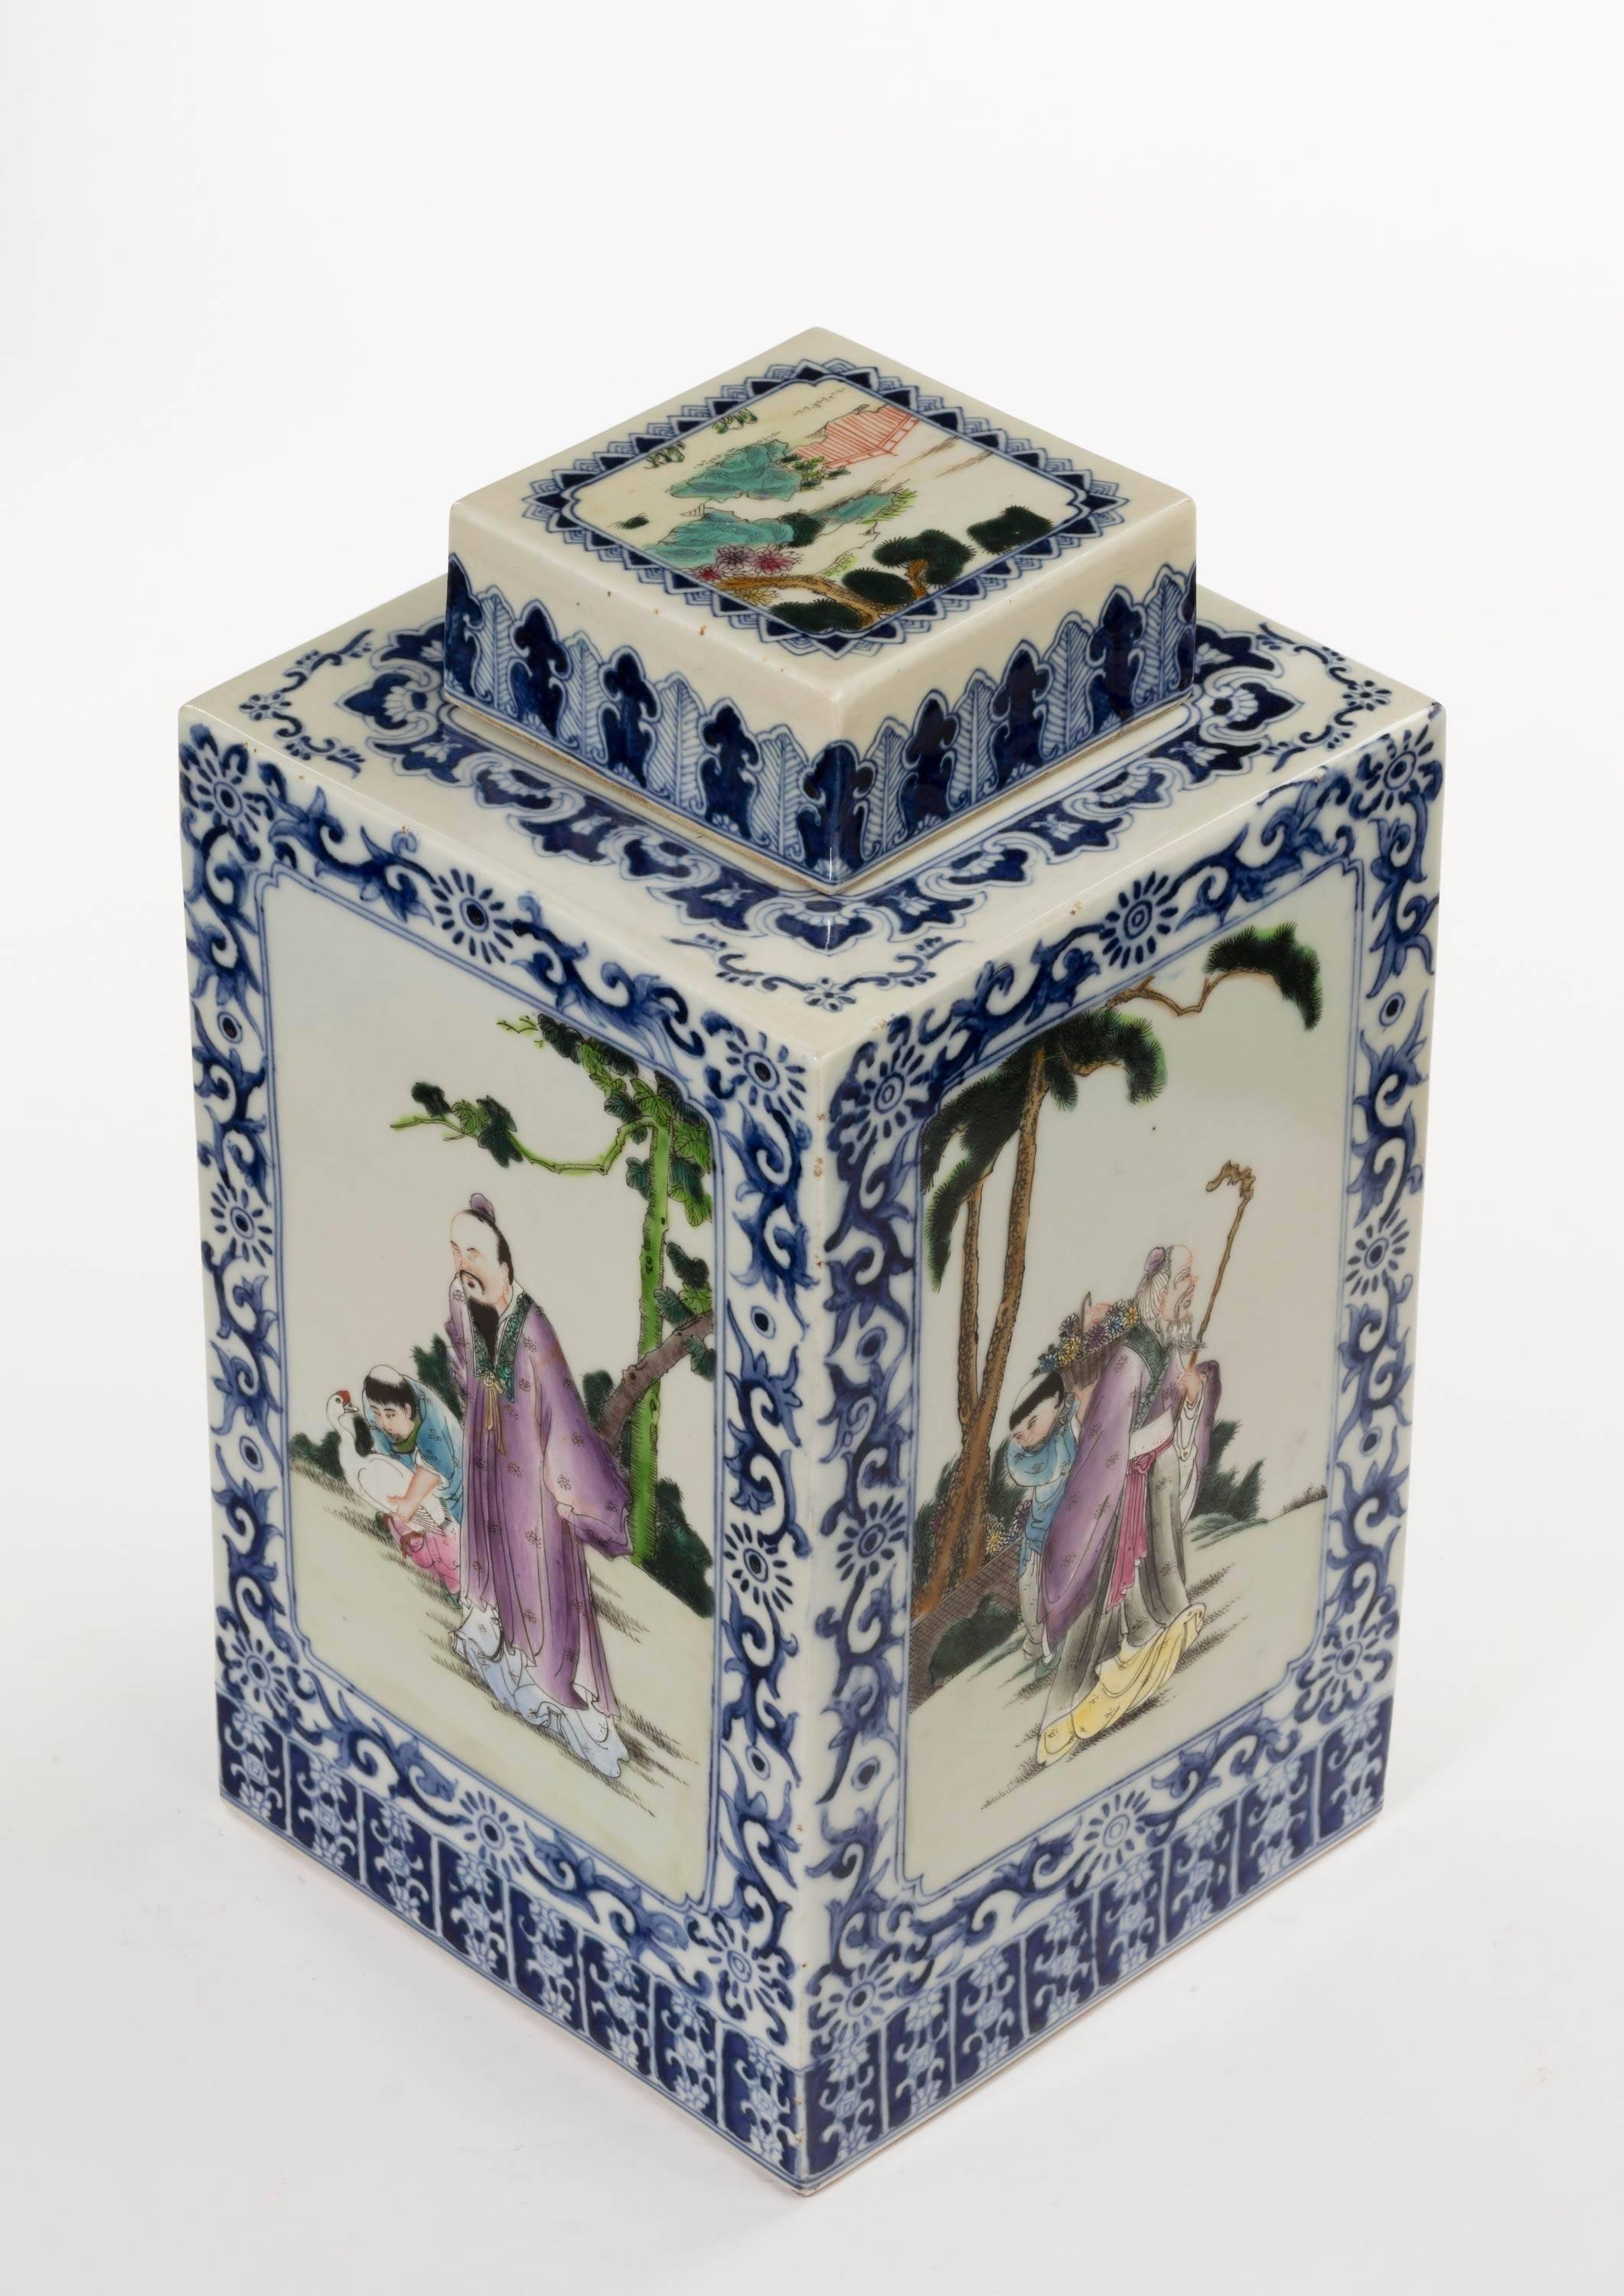 A massive mid-19th century Chinese porcelain vase and lid. Excellent overall condition. With figures to each side within a scroll frame work. six-character mark to base Xianfeng.